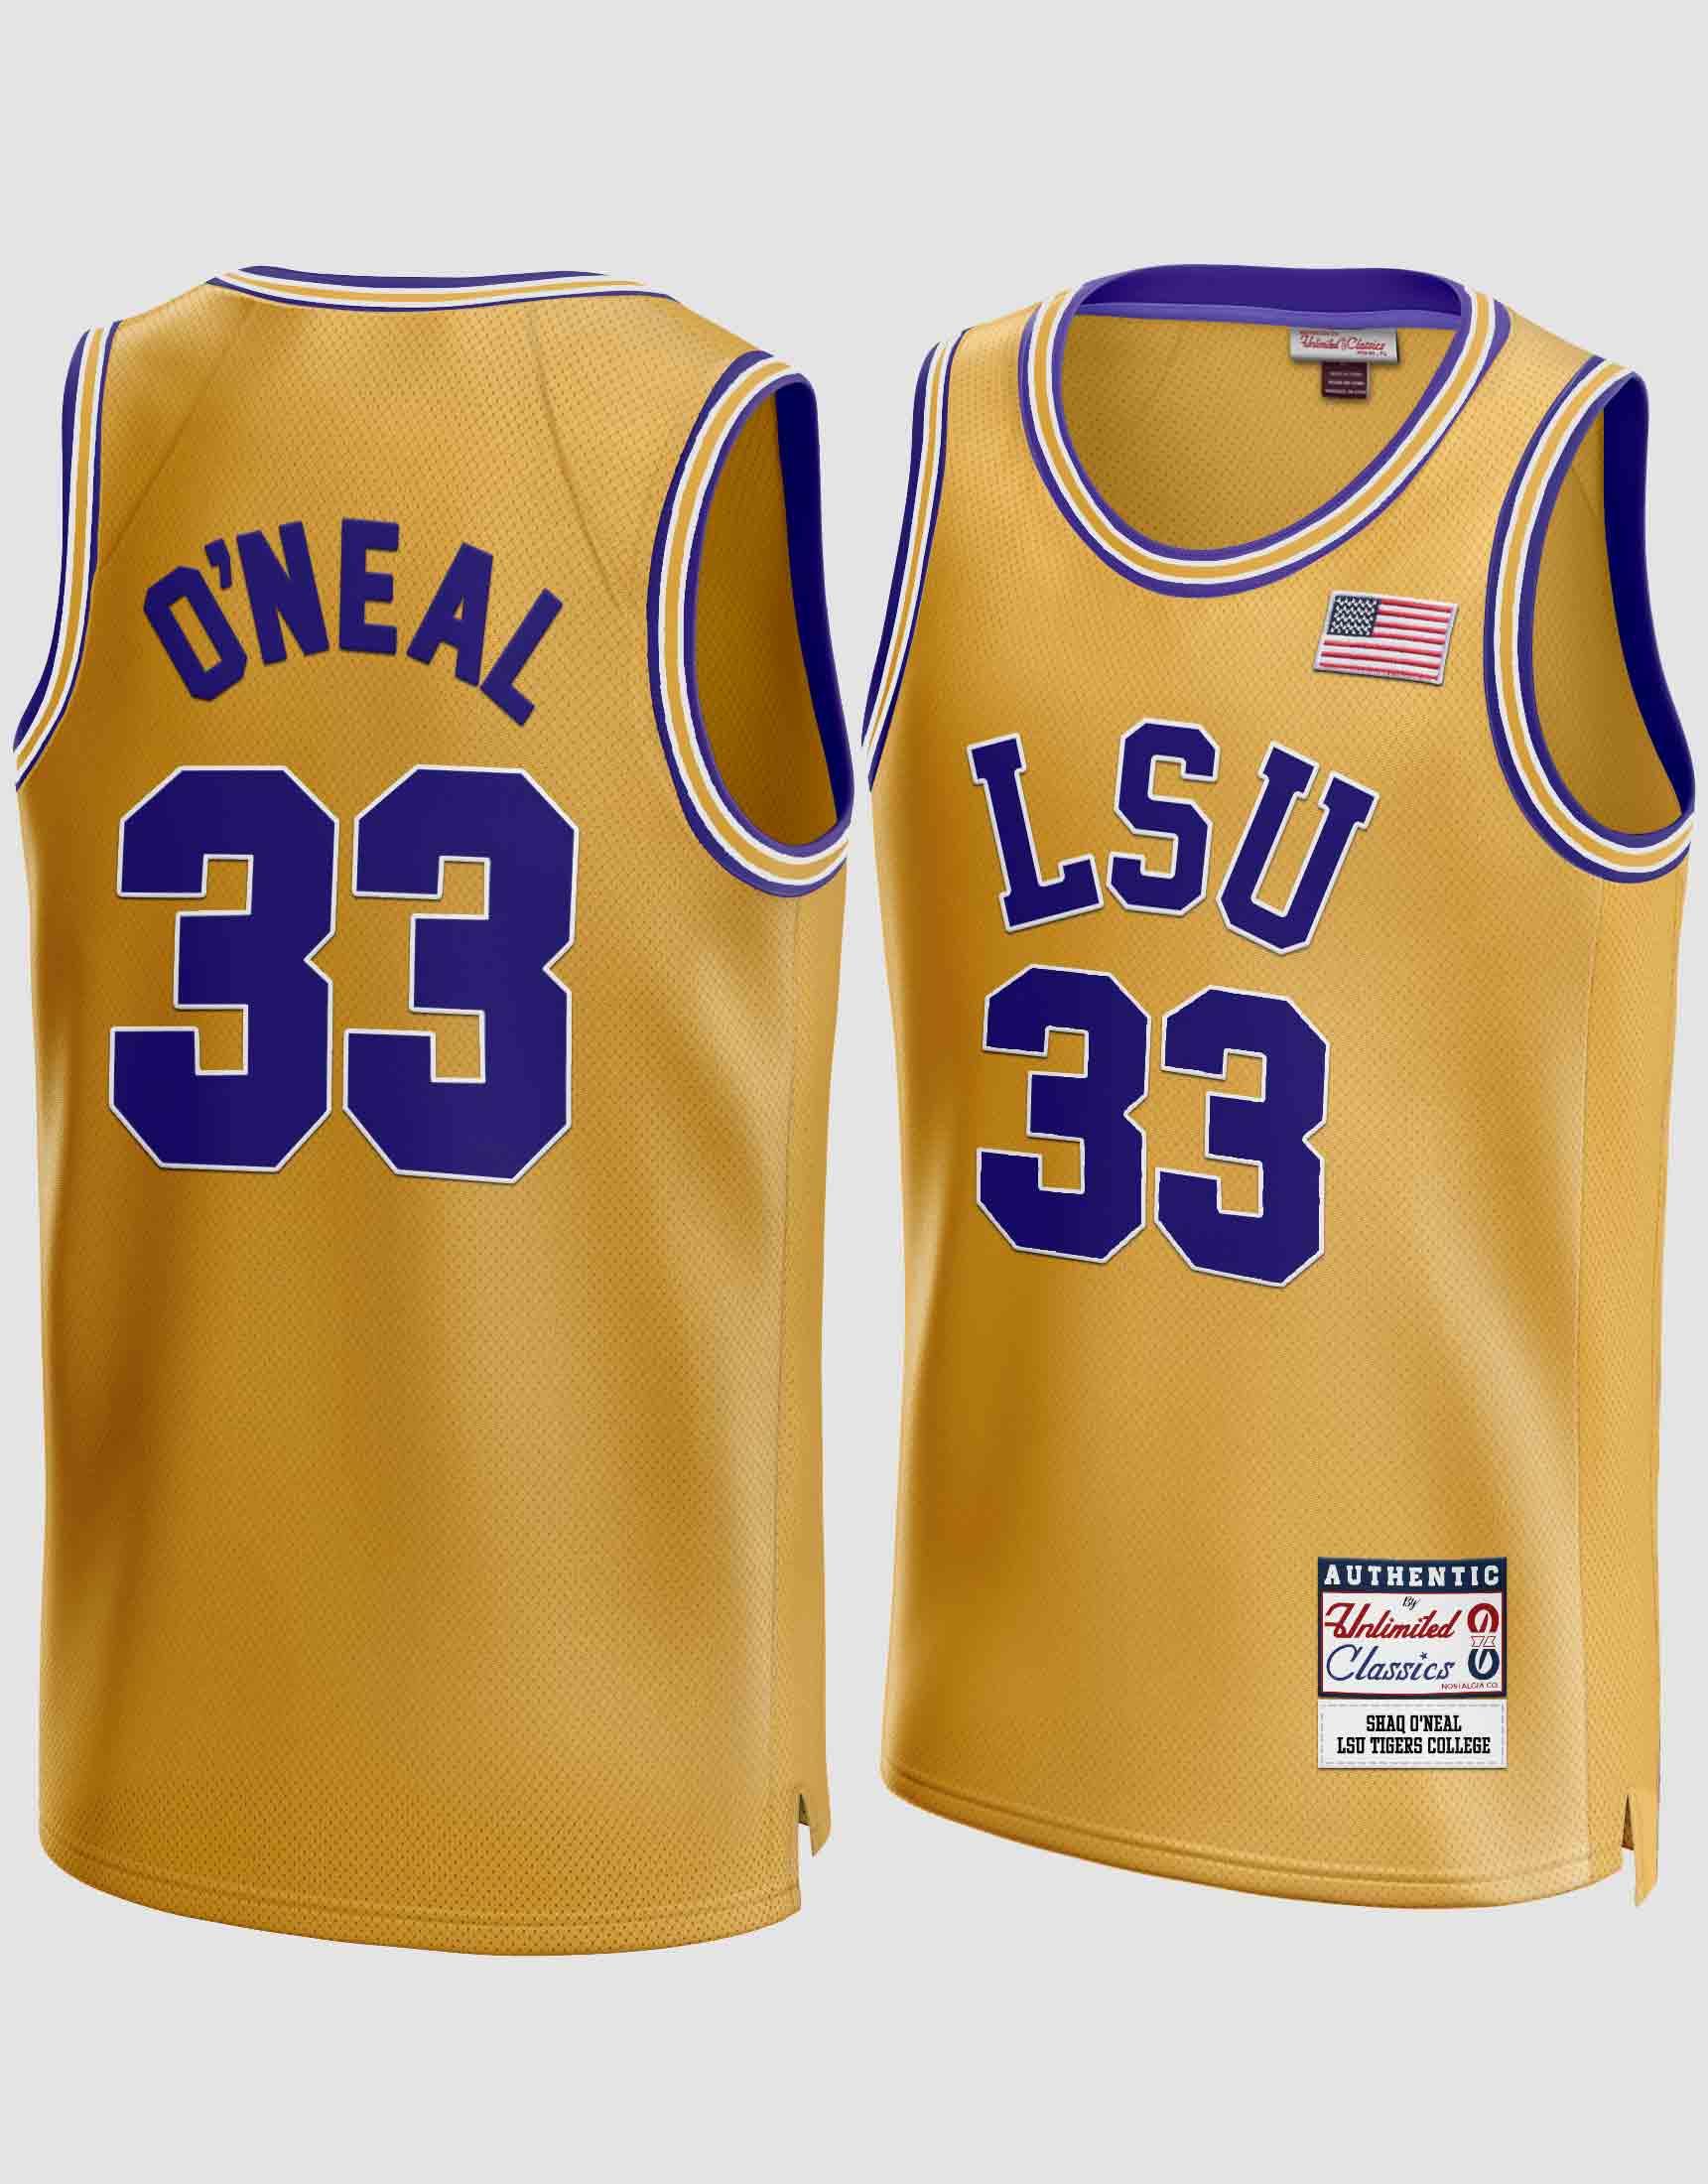 Unlimited Classics Shop O'Neal #33 LSU Tigers College Blue Basketball Jersey Online in USA S